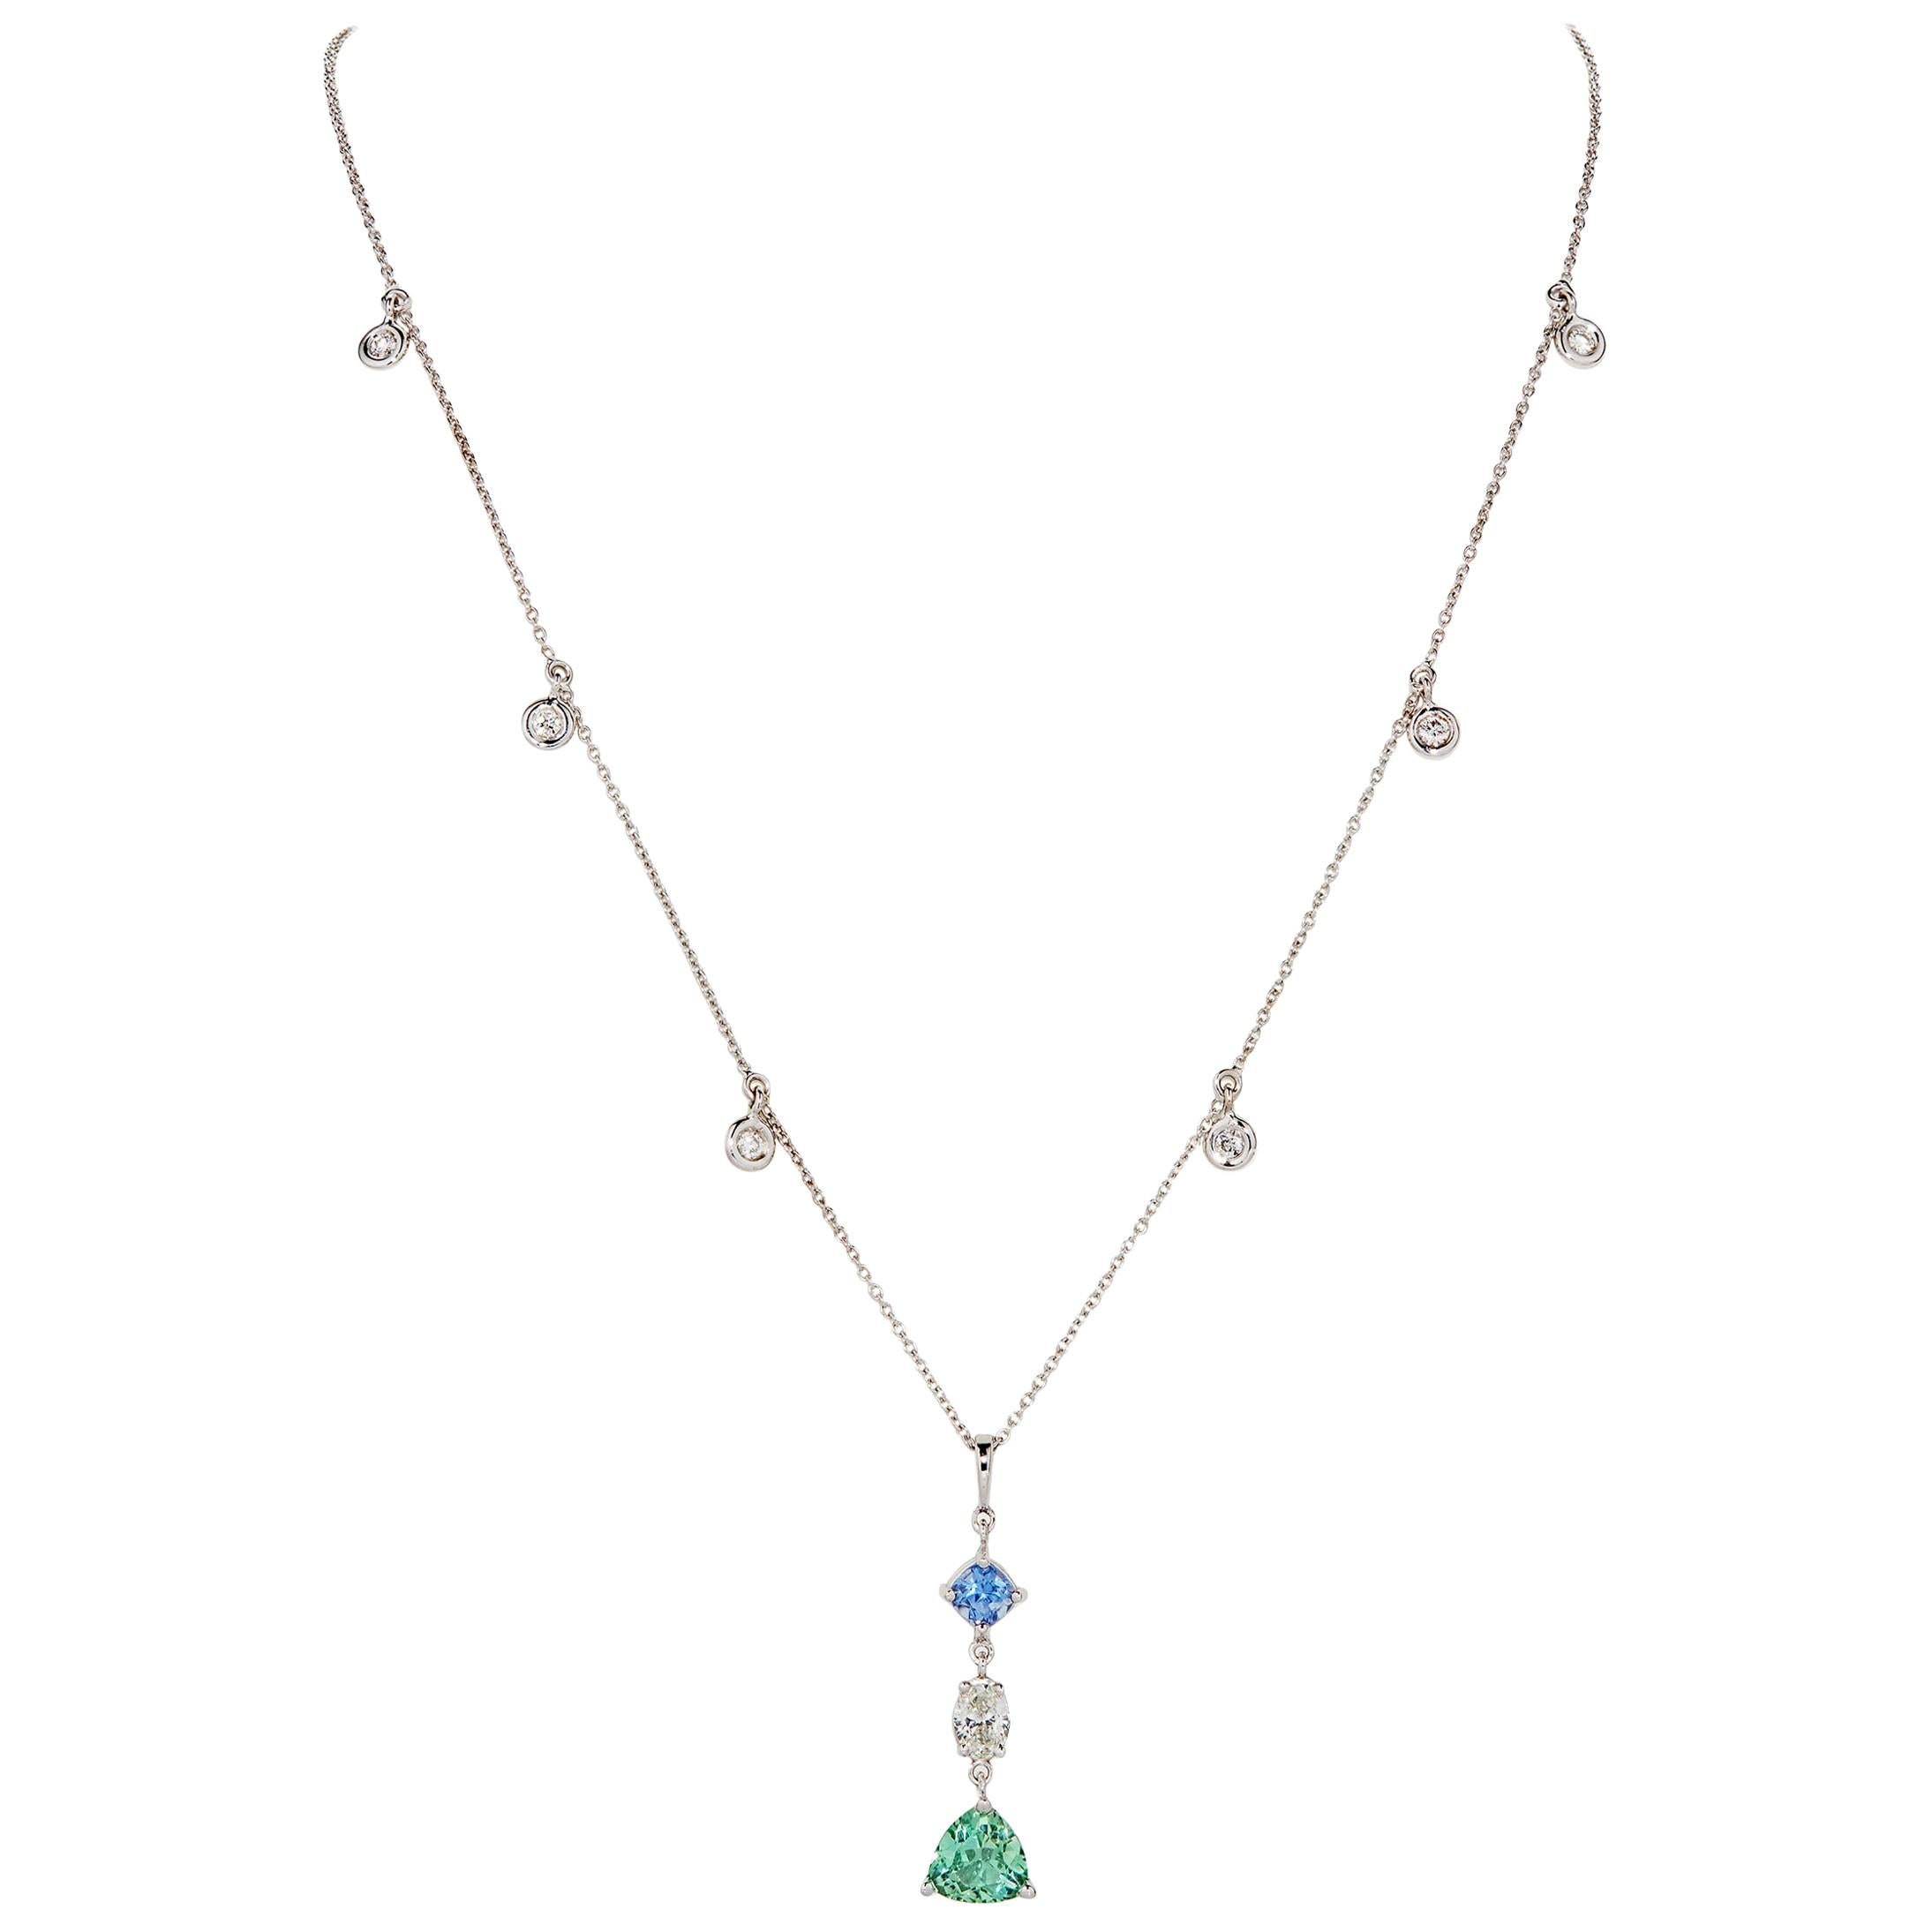 2.65 Carats of Tourmaline, Sapphire, and Diamond Necklace in 18 Karat White Gold